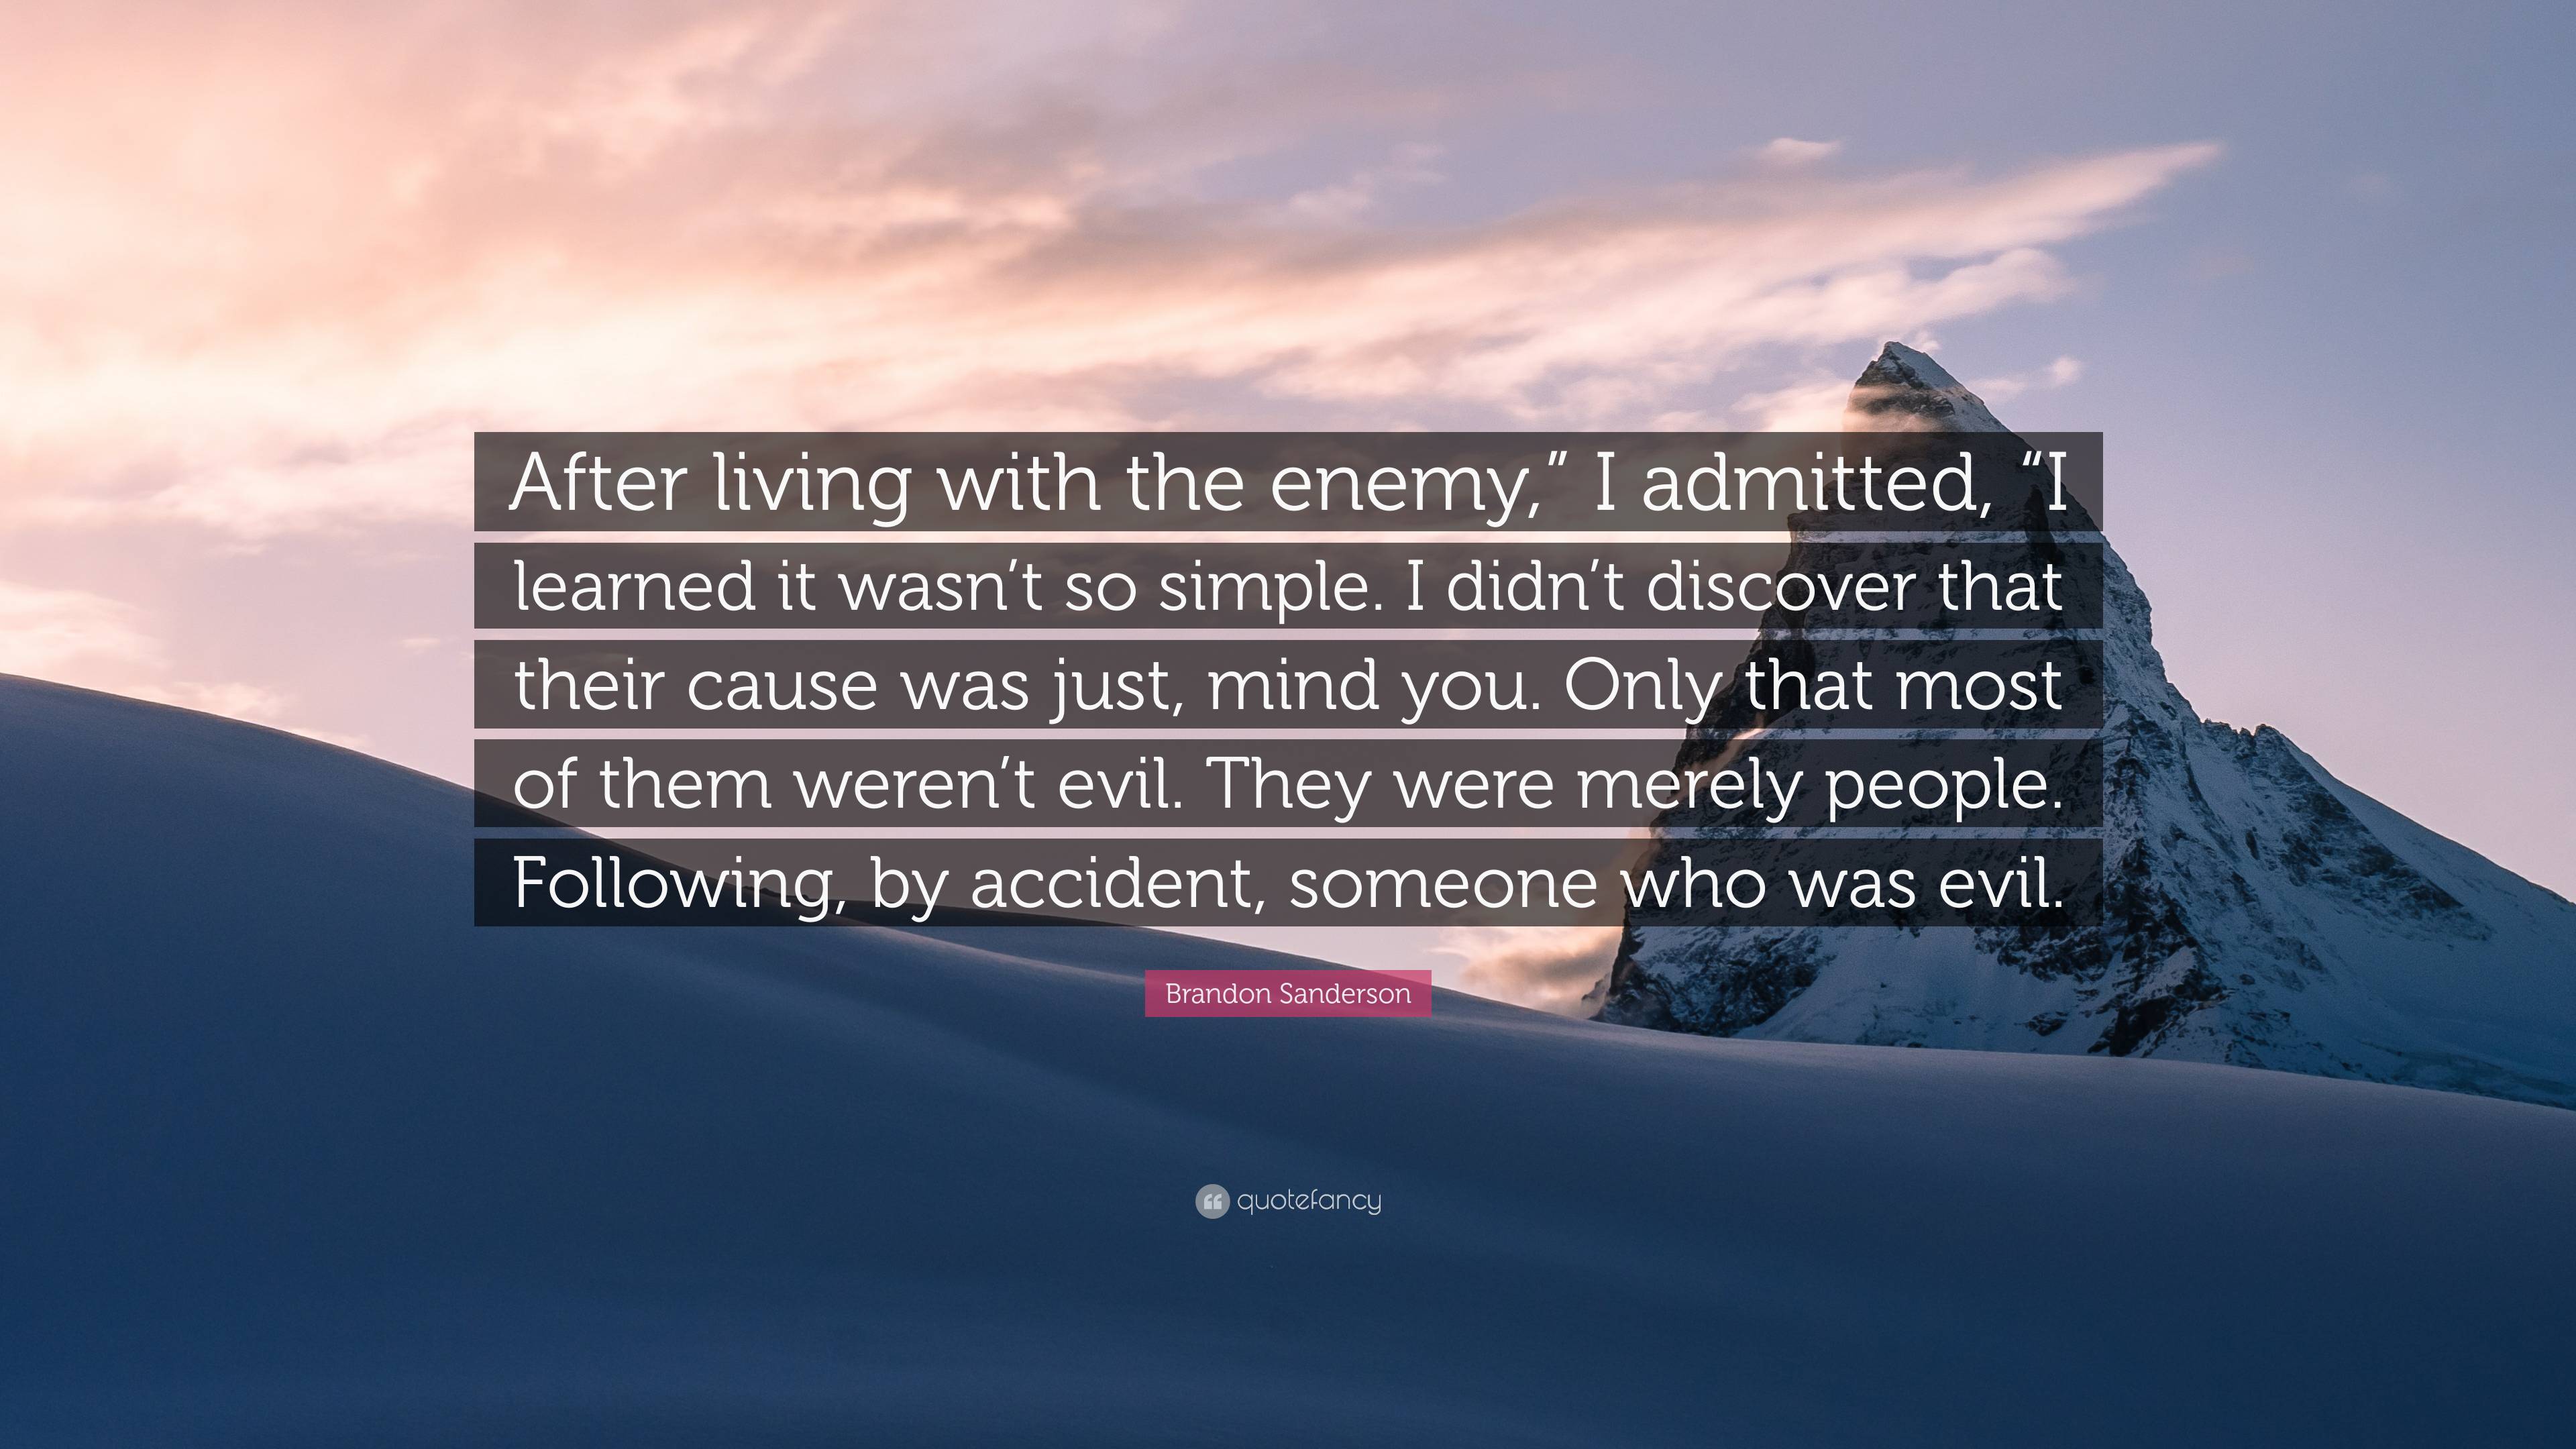 Brandon Sanderson Quote: “After living with the enemy,” I admitted, “I  learned it wasn't so simple. I didn't discover that their cause was just,  m”